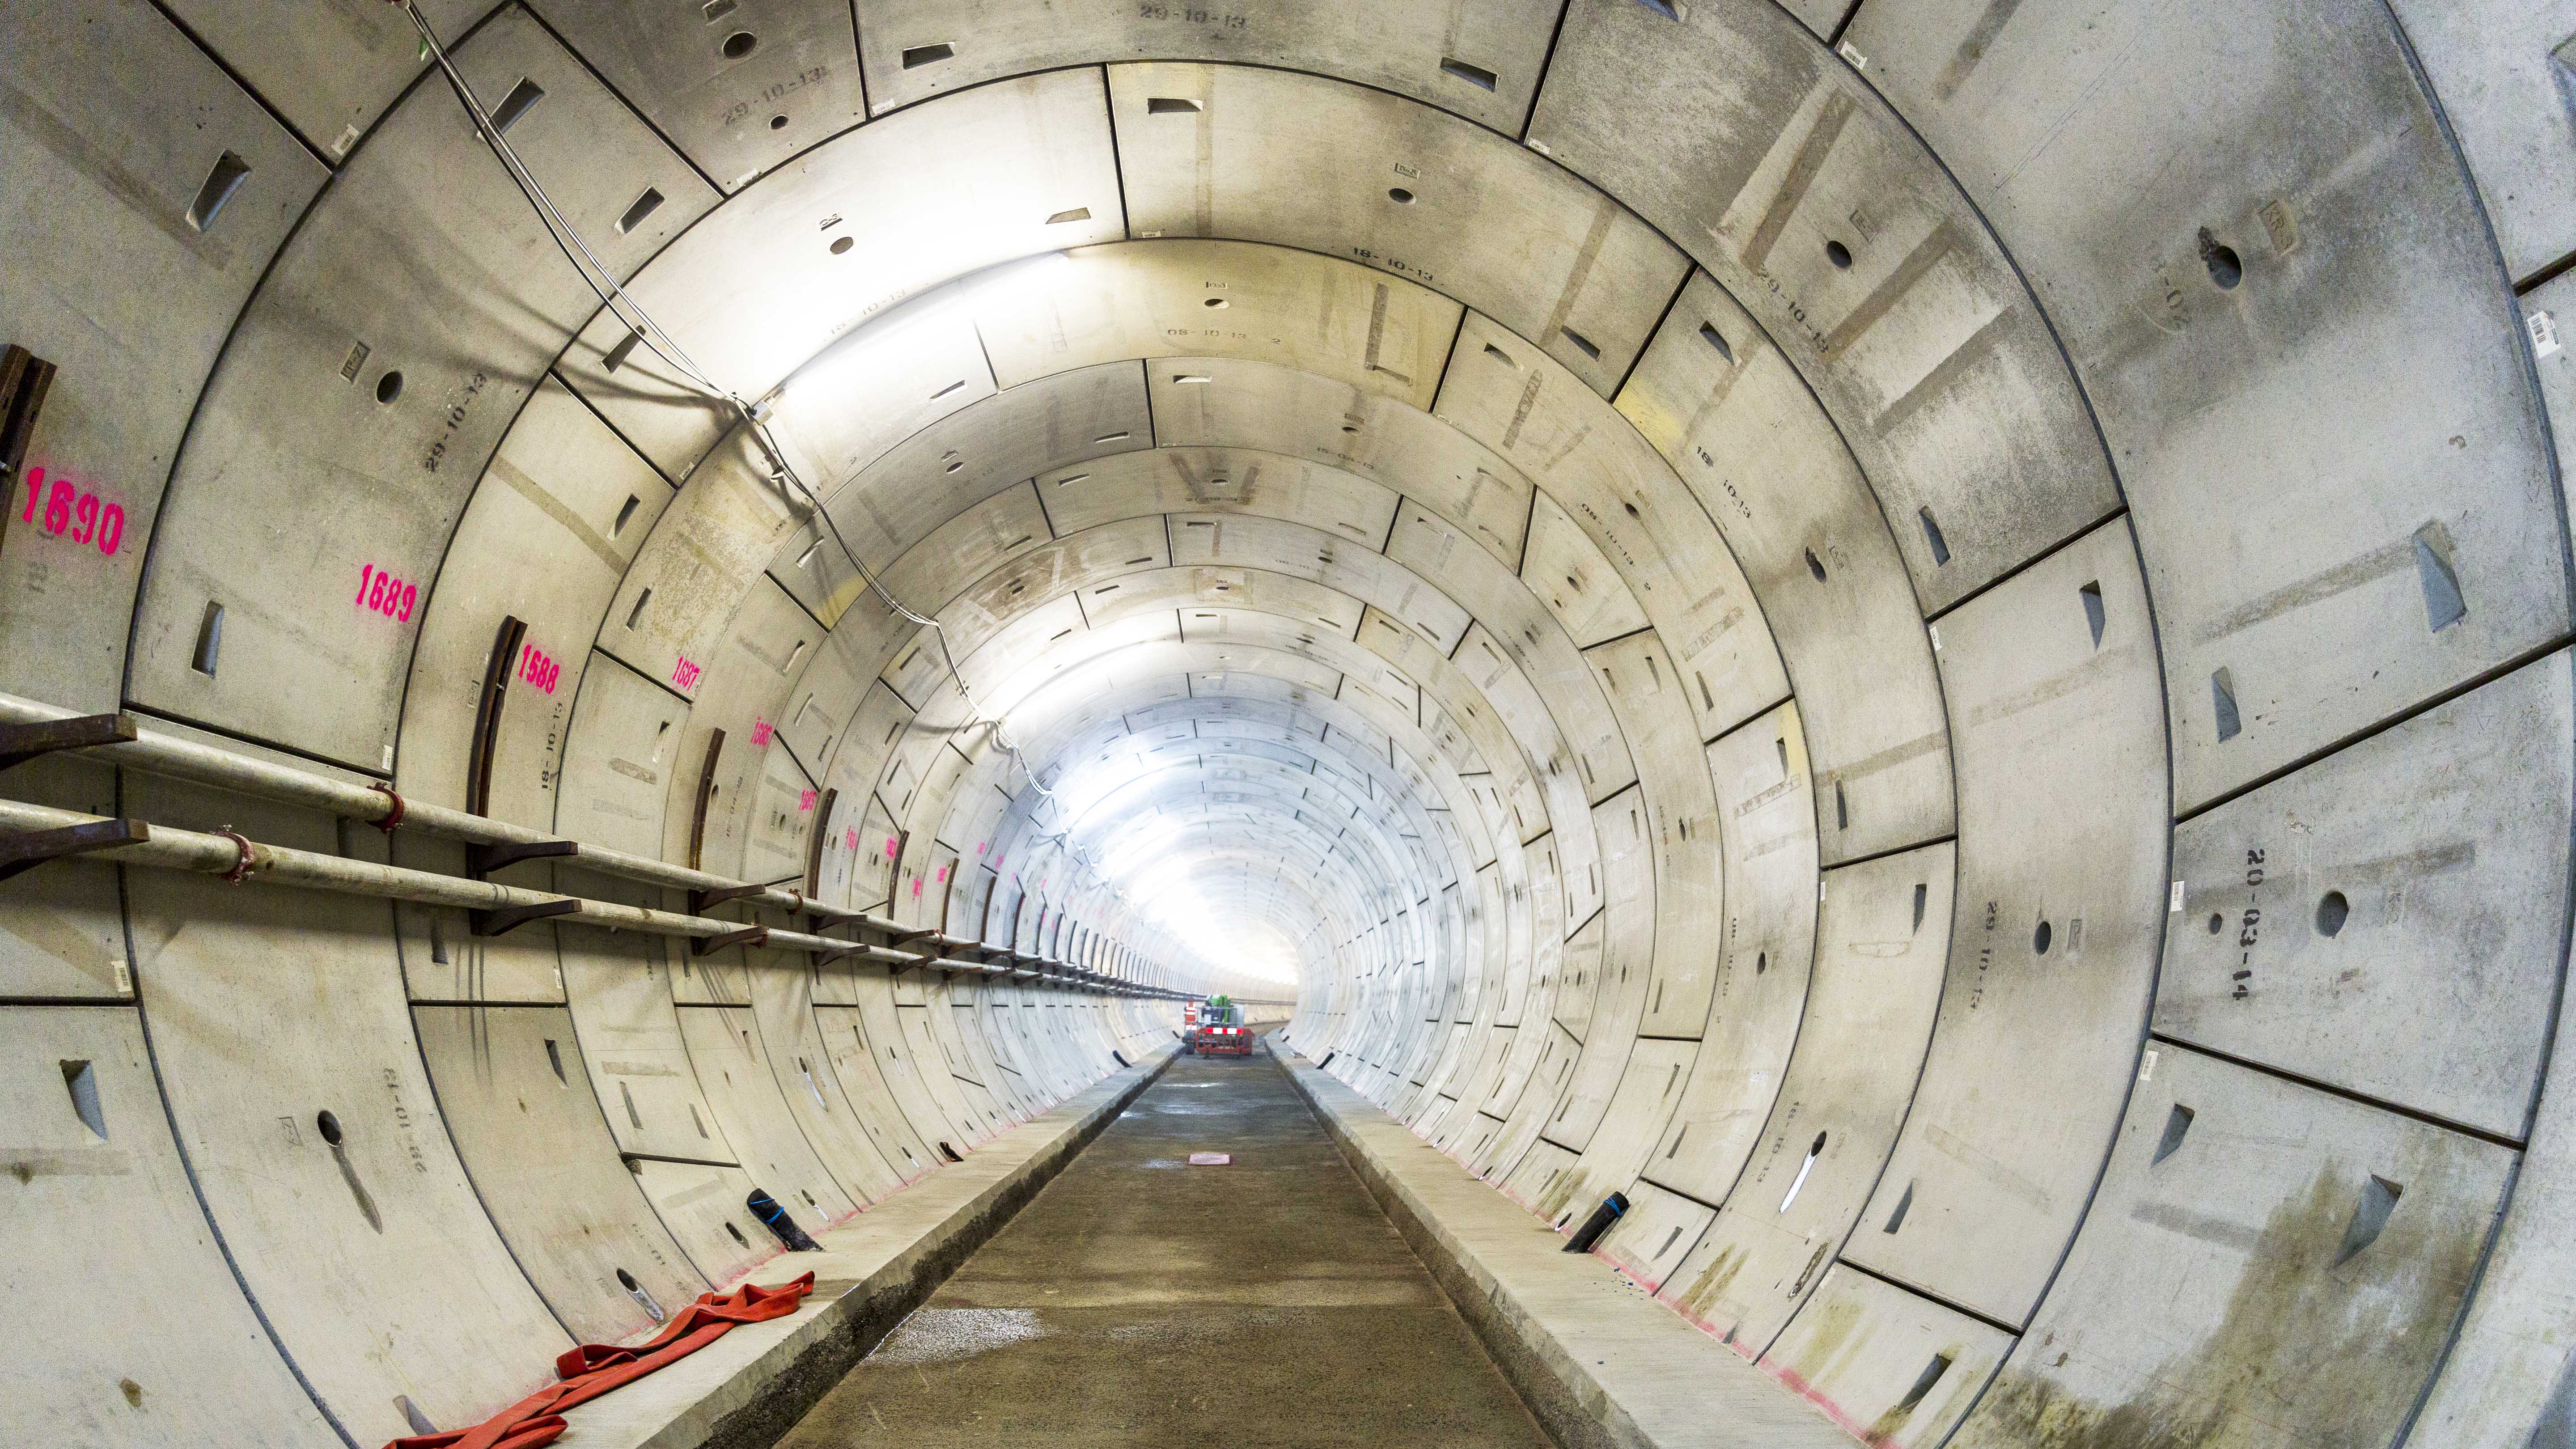 LONDON, 10 APRIL 2015: Section of new rail tunnel, under construction for the London Crossrail Project at North Woolwich, London, England, UK; Shutterstock ID 269087891; purchase_order: na; job: CJ Len Bunton April 7; client: ; other: 